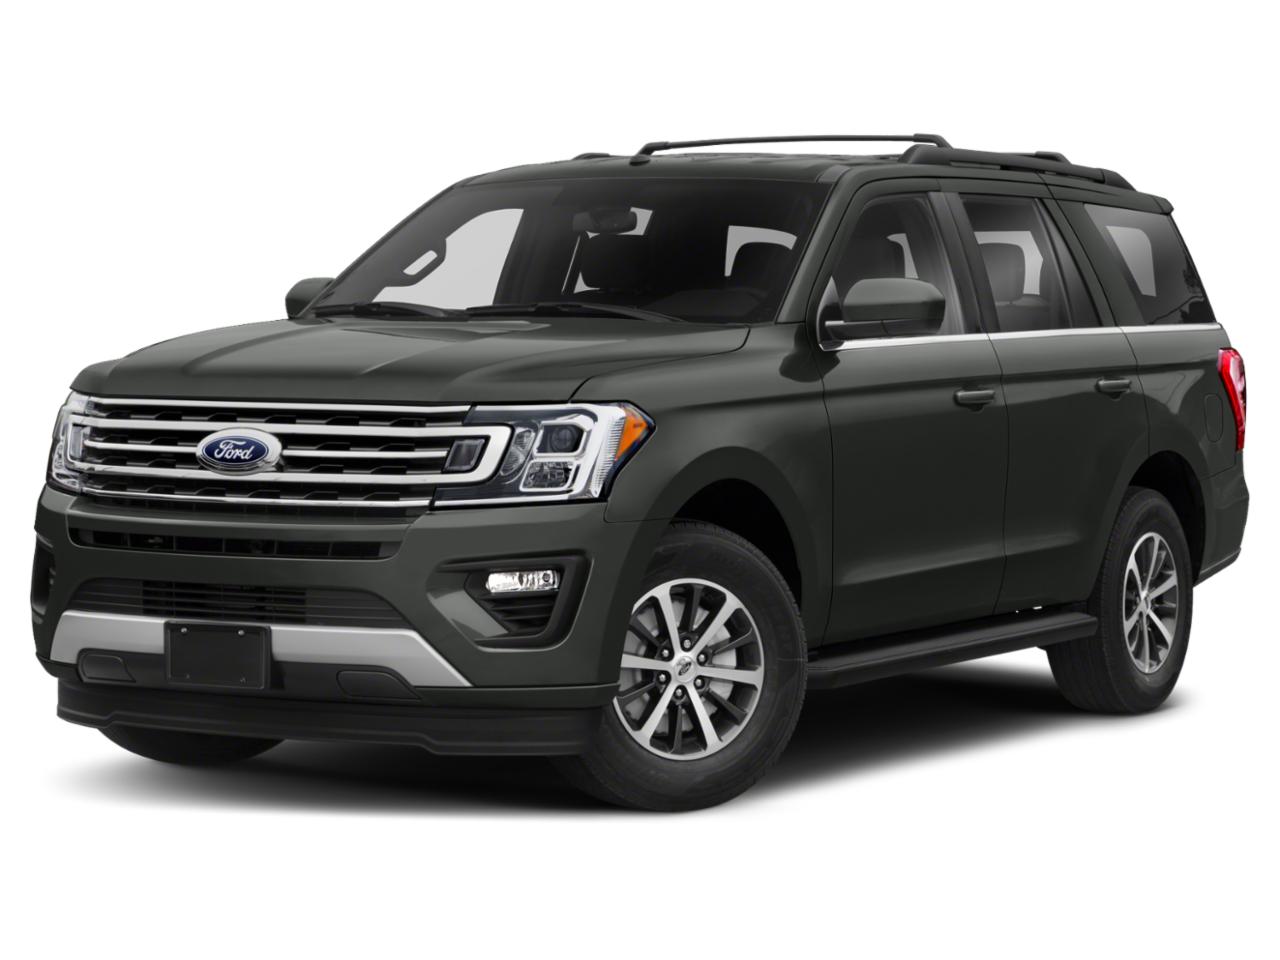 2018 Ford Expedition Vehicle Photo in San Antonio, TX 78230